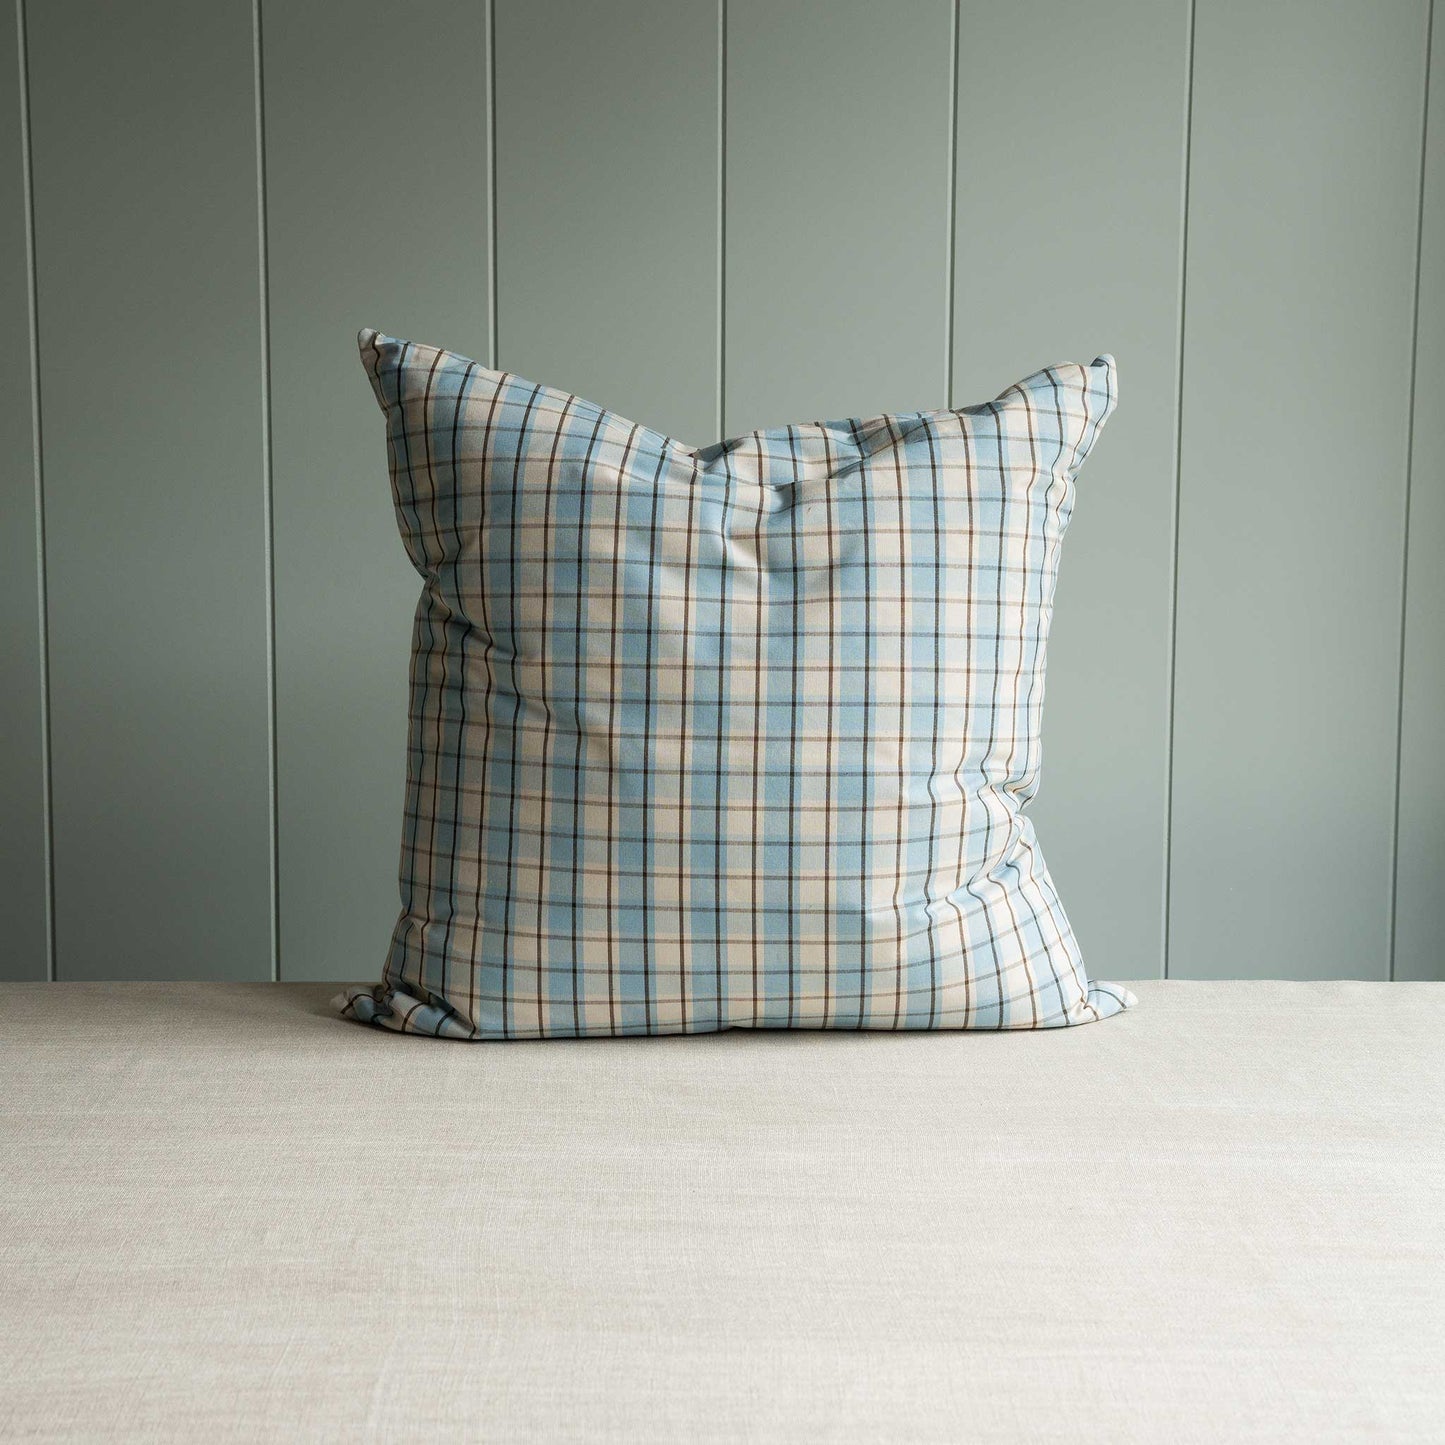 Square Kip Cushion in Square Deal Cotton, Blue Brown